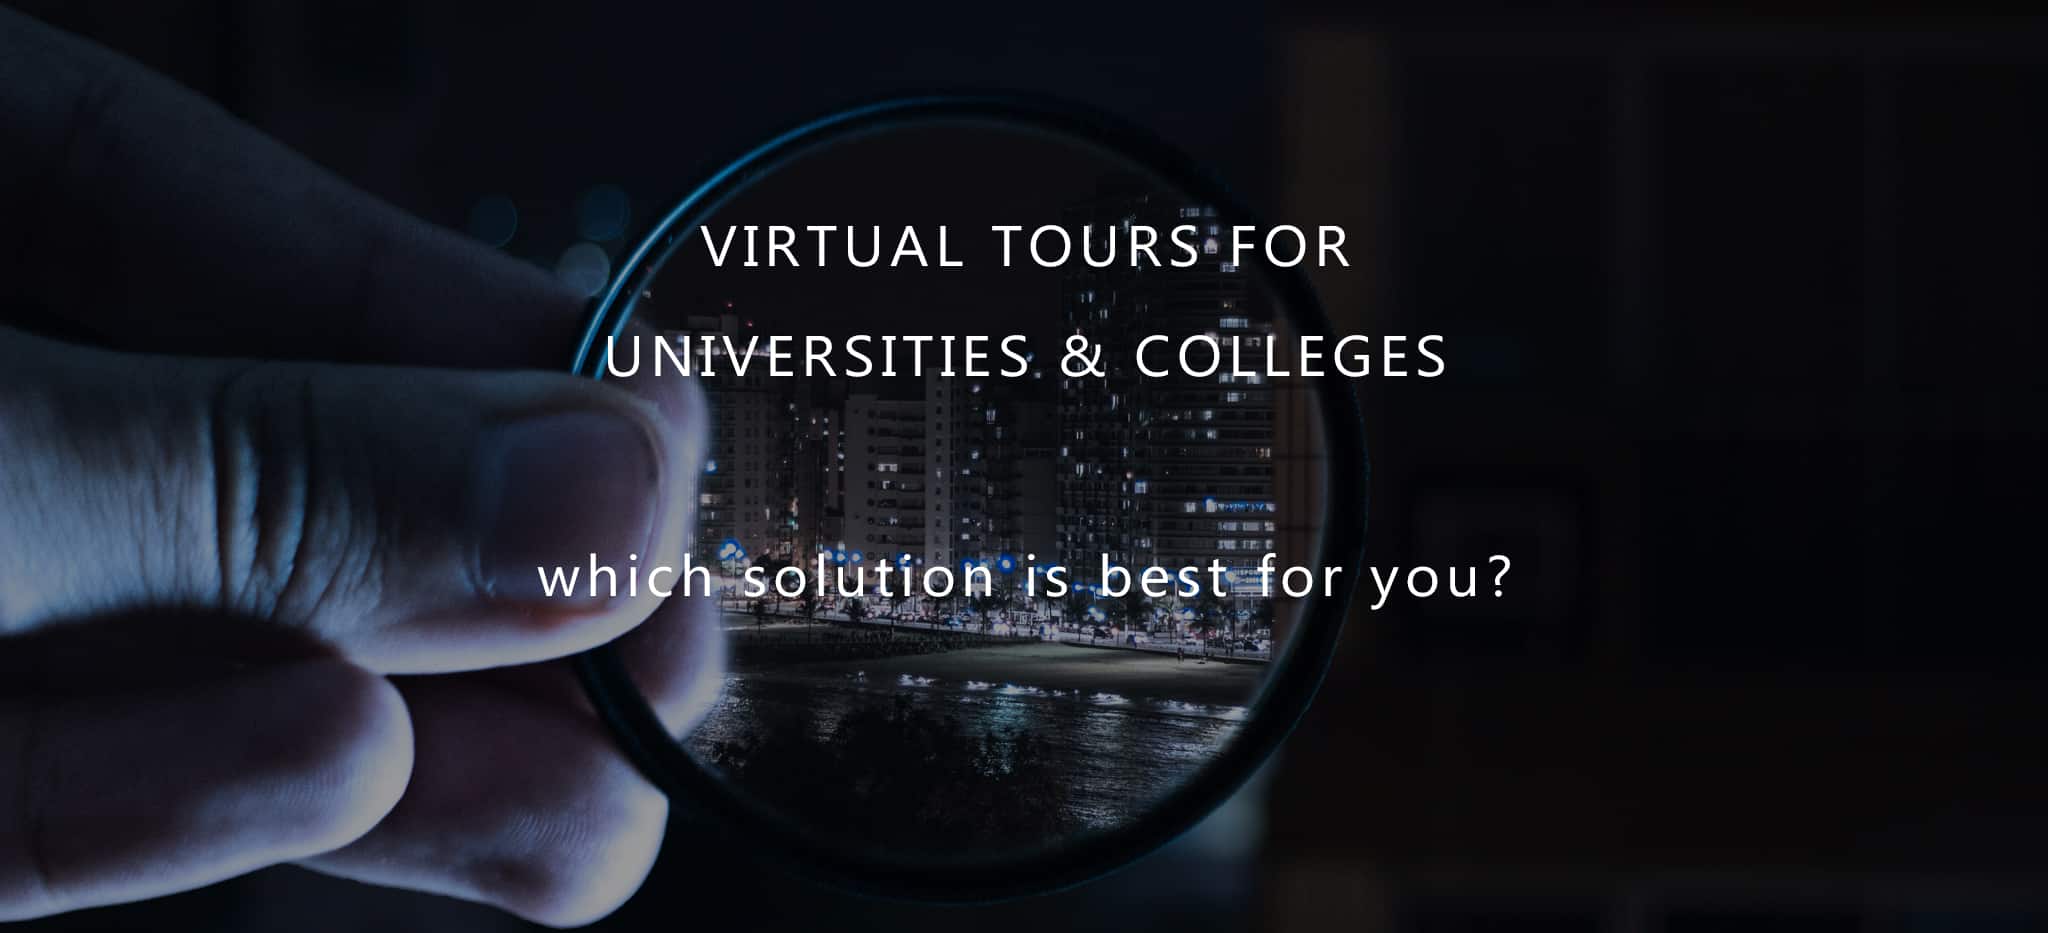 Virtual Tour Experts - Blog - Unique Branded Experience - Virtual Tours for Universities, Colleges, Schools and Tourism